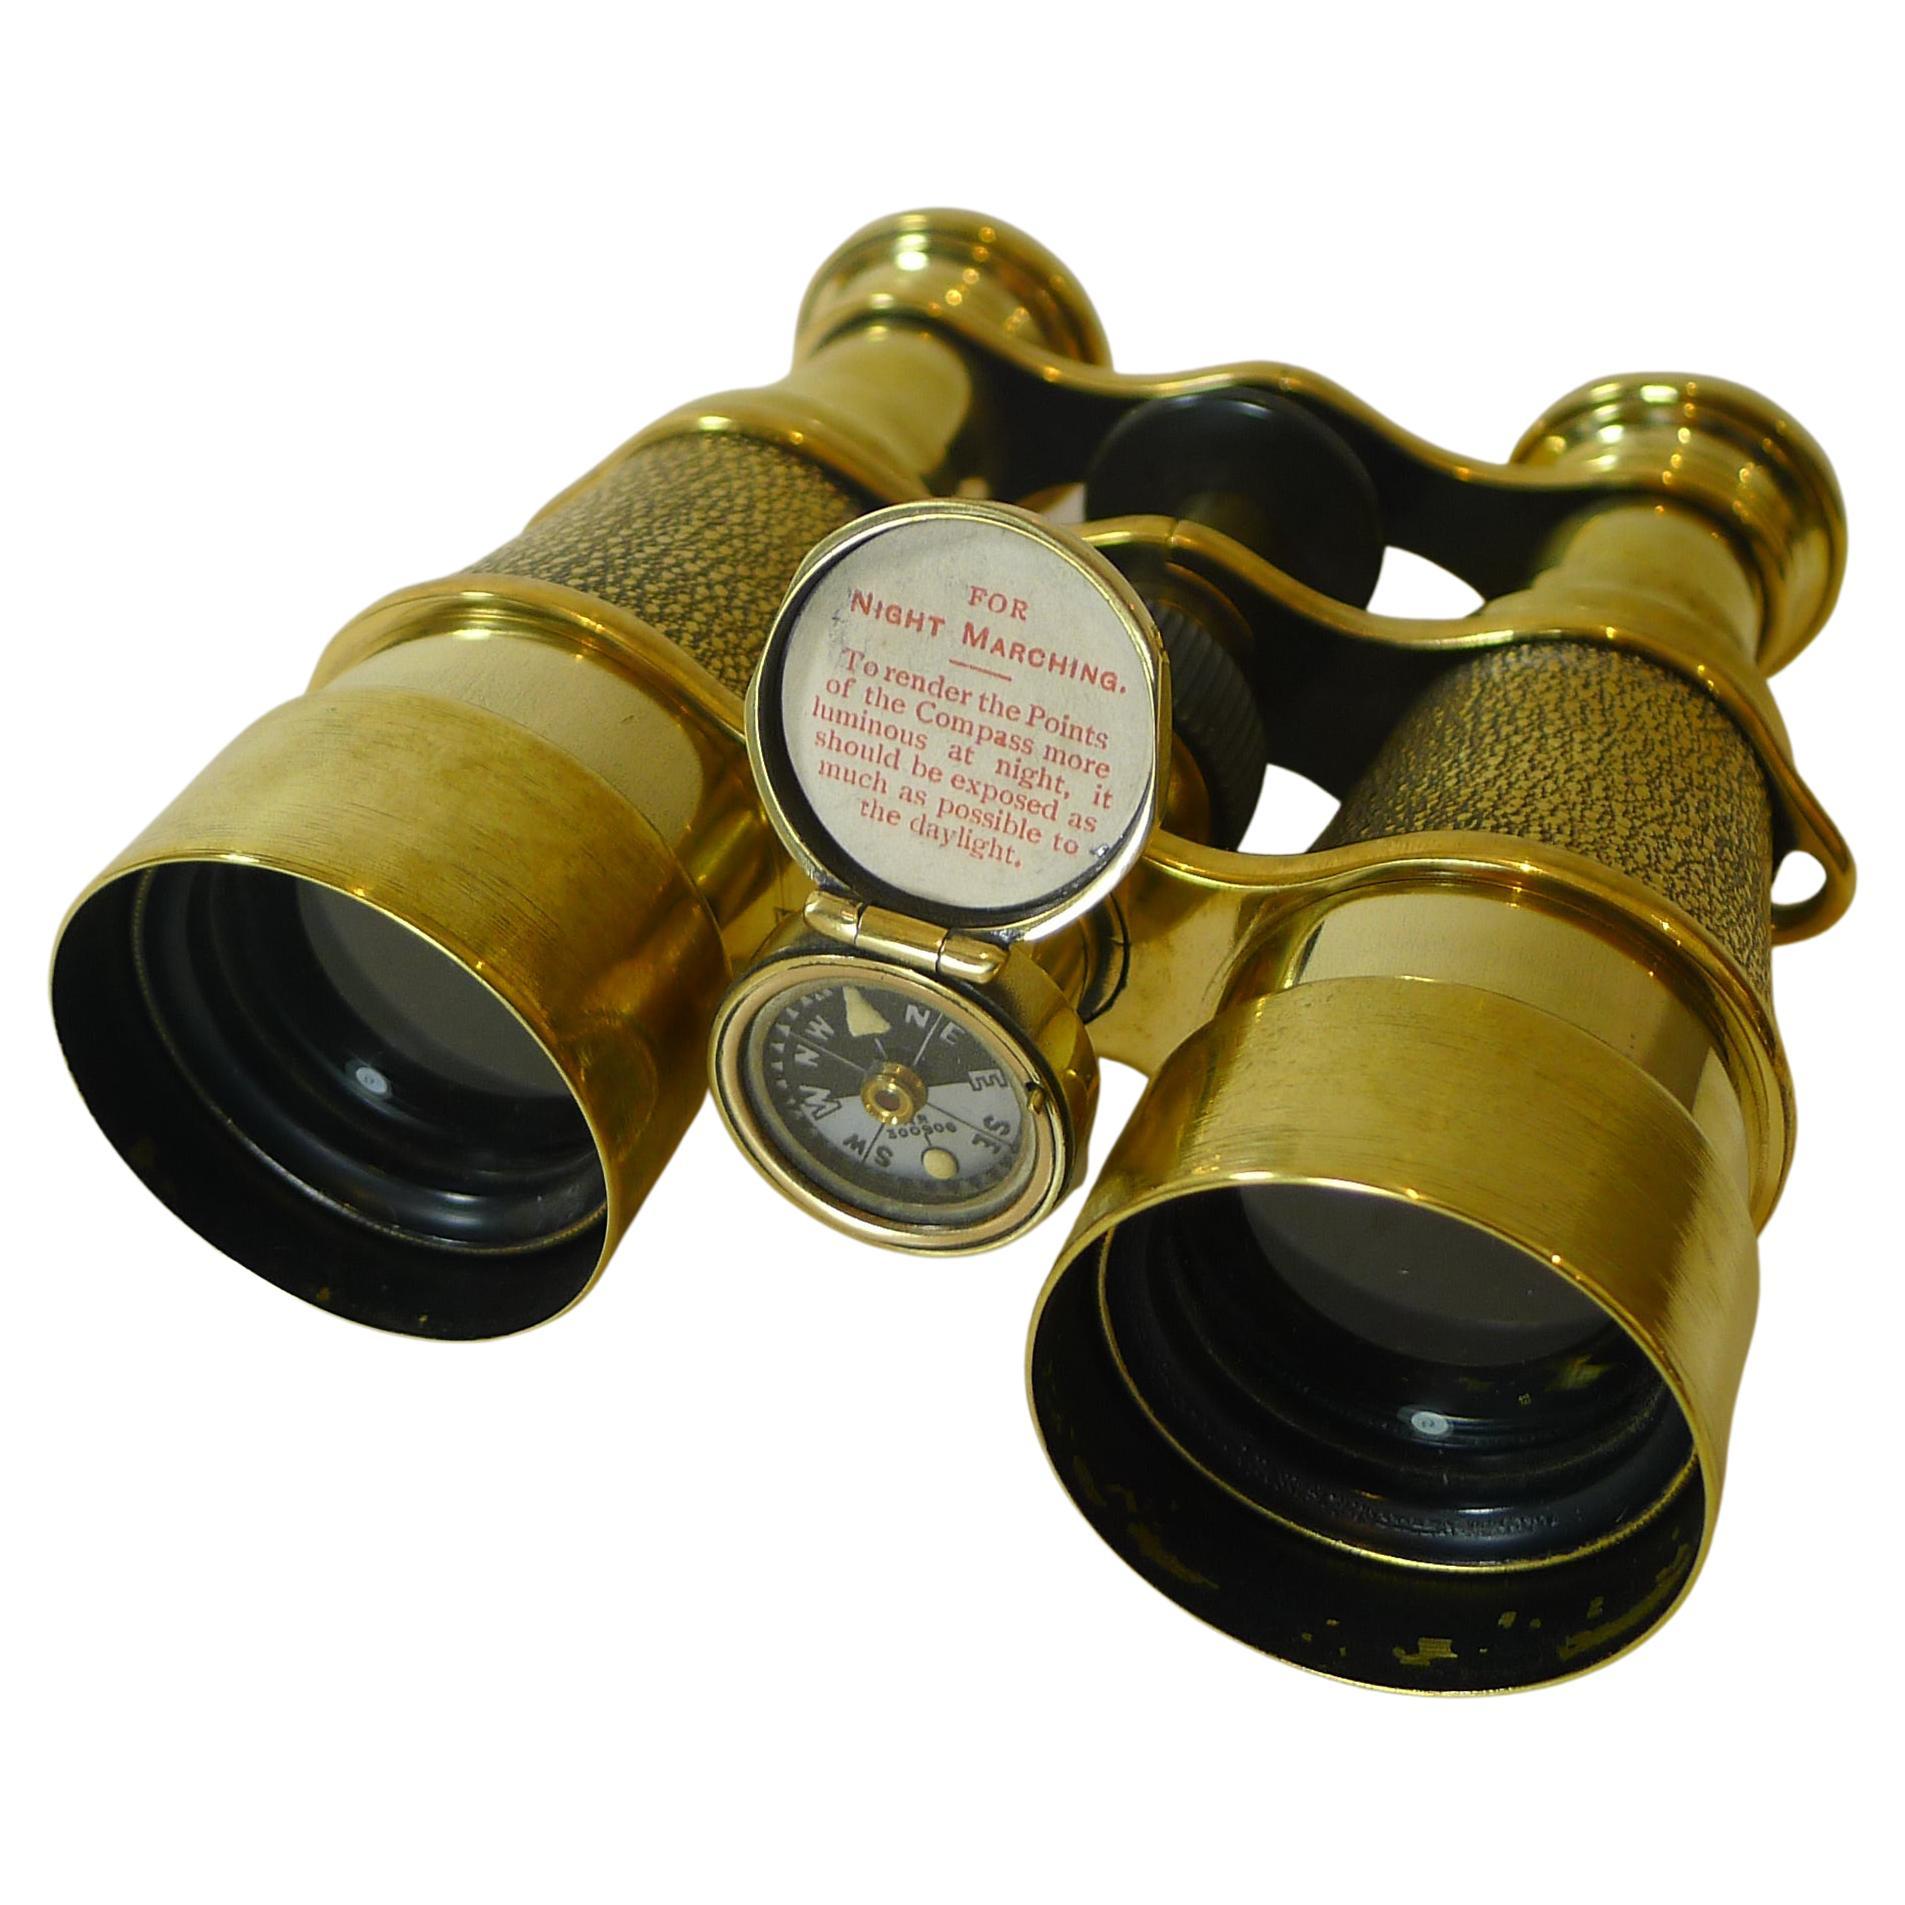 Antique English Field Glasses / Binoculars by Lawrence and Mayo - With Compass